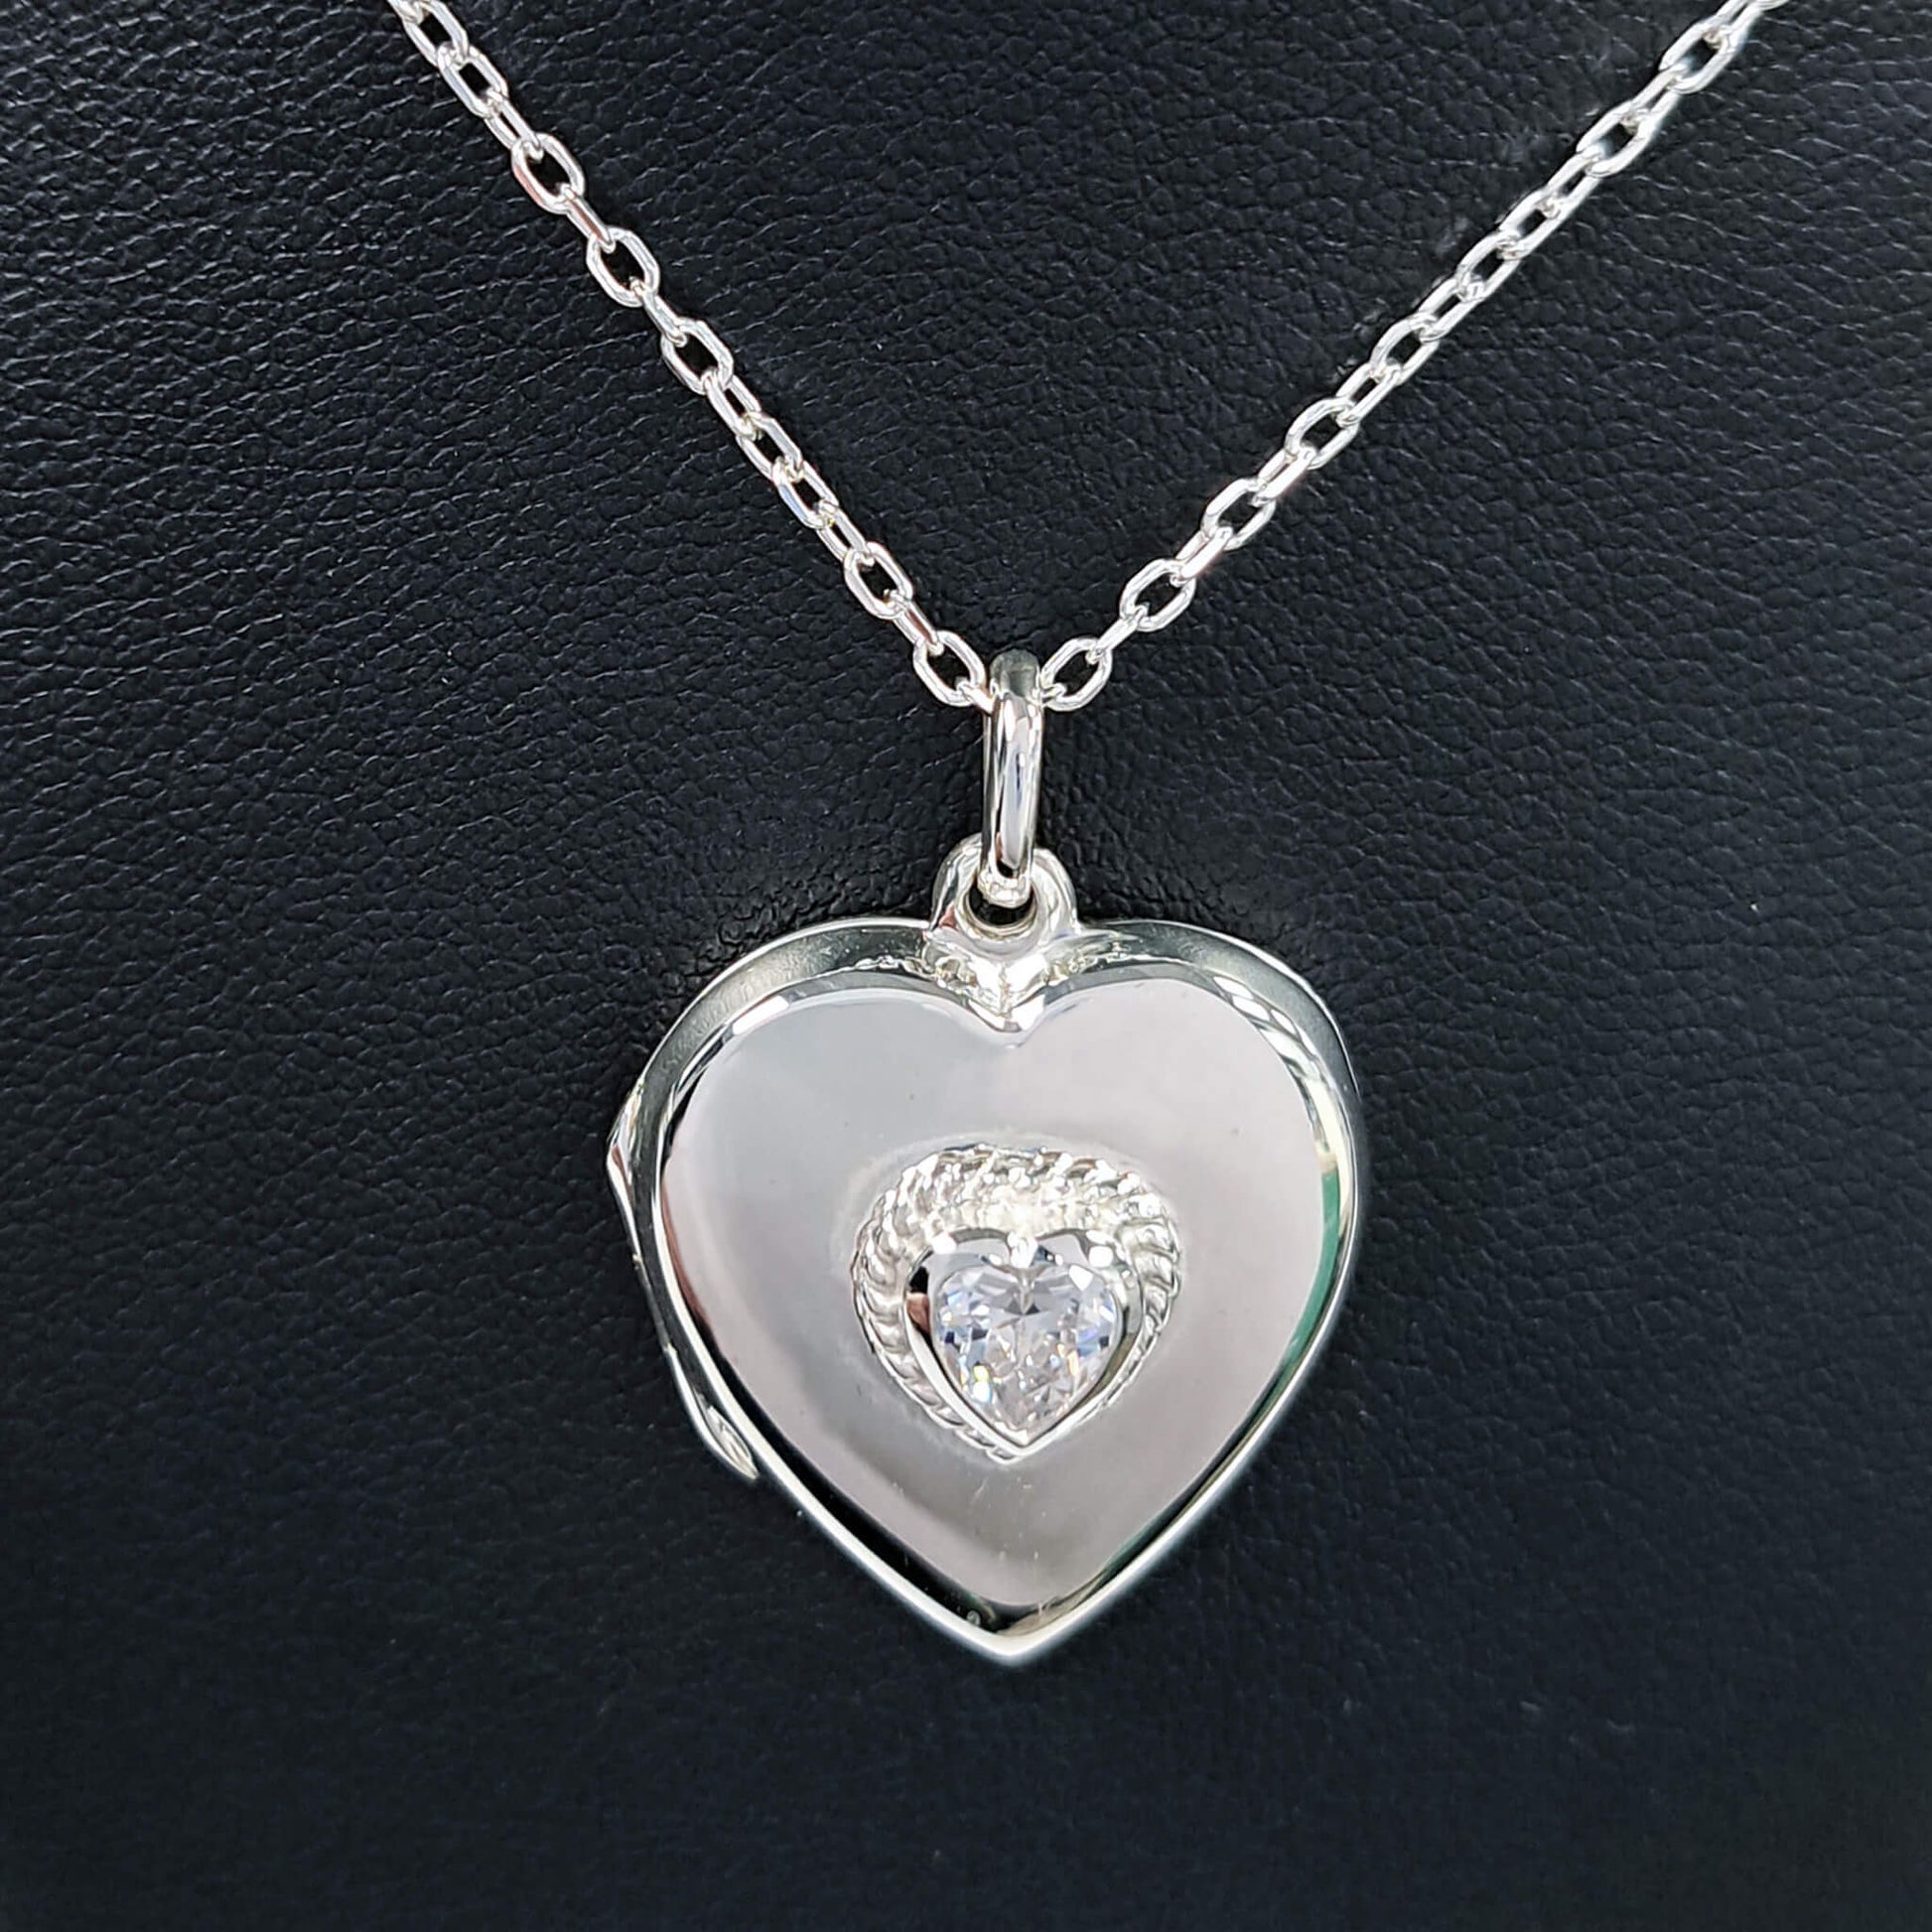 Close up of Heart-shaped chain and locket necklace with cubic zirconia inset on a silver chain.